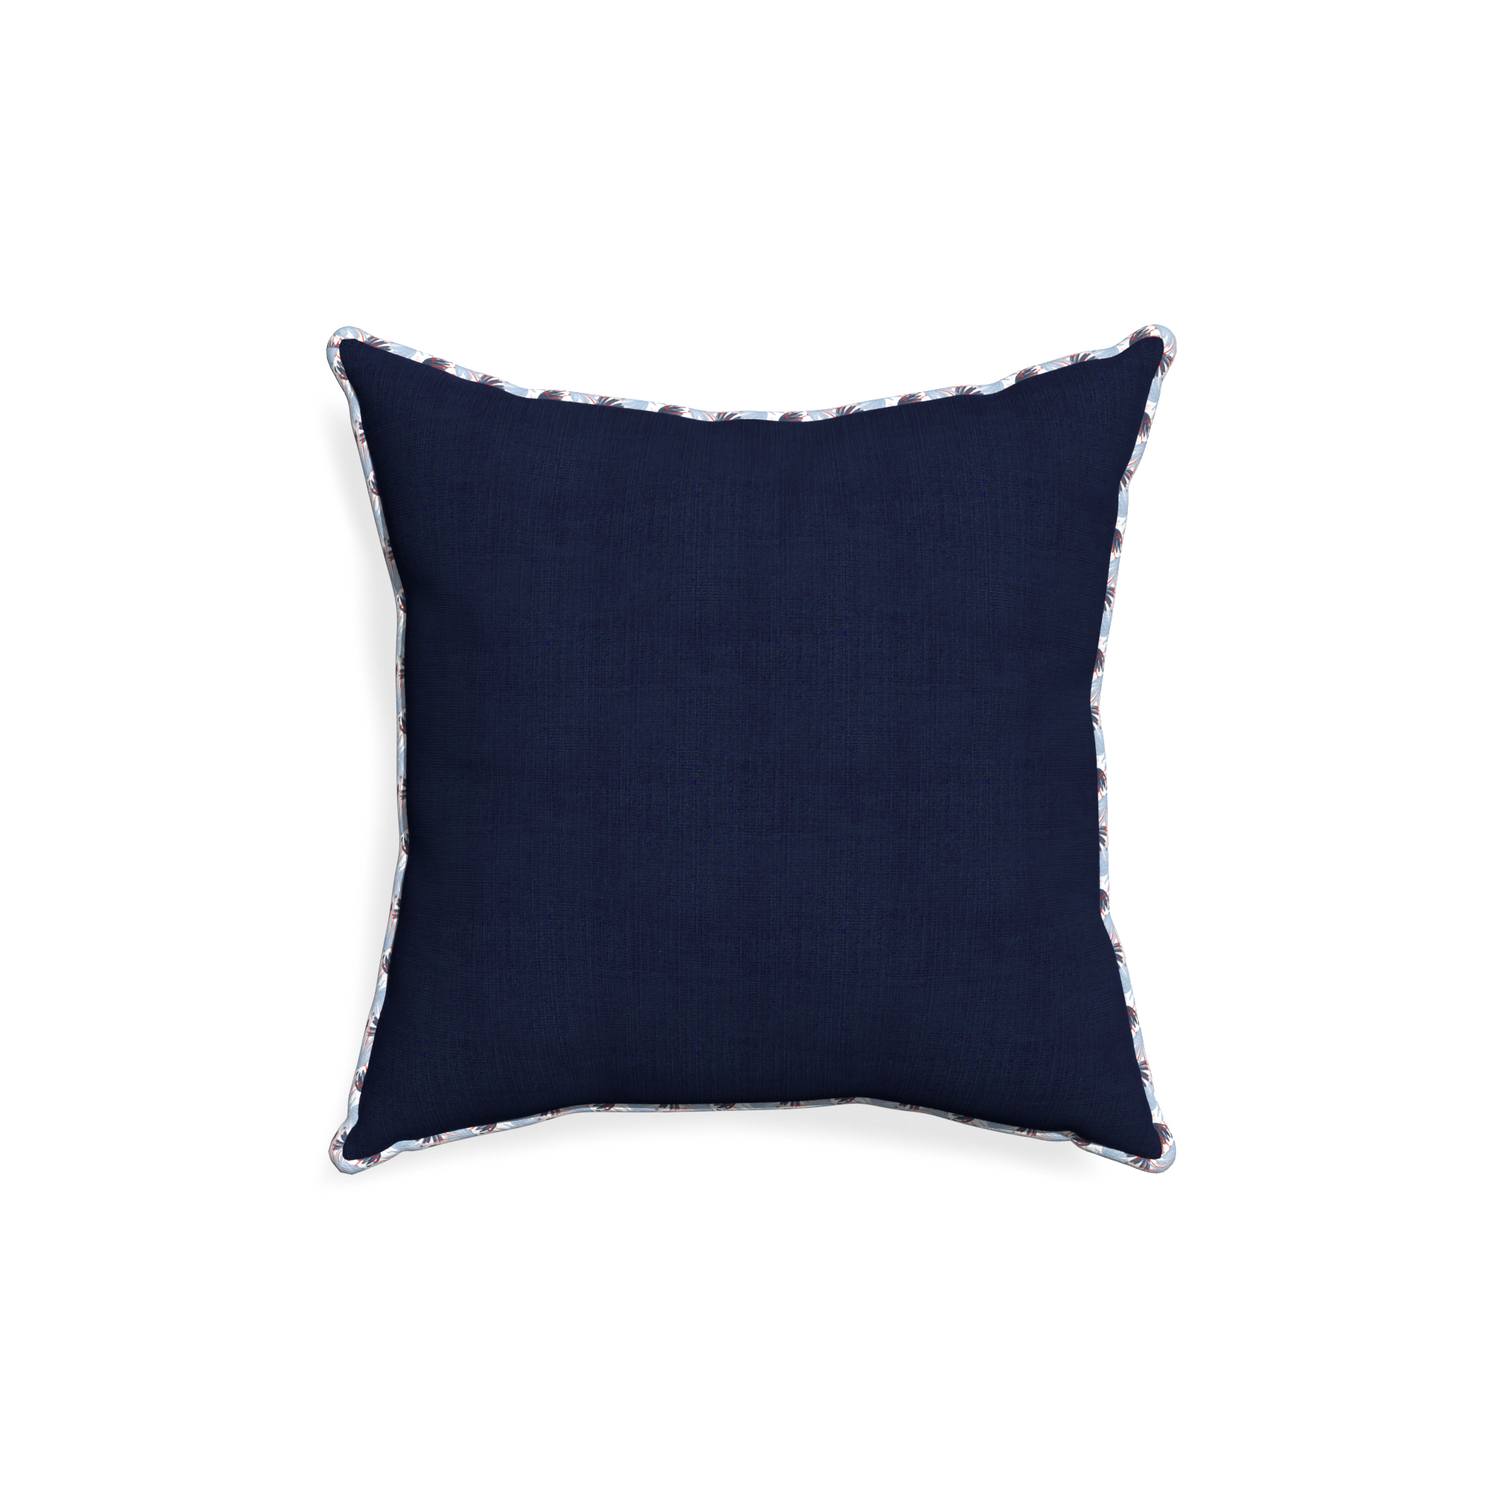 18-square midnight custom navy bluepillow with e piping on white background